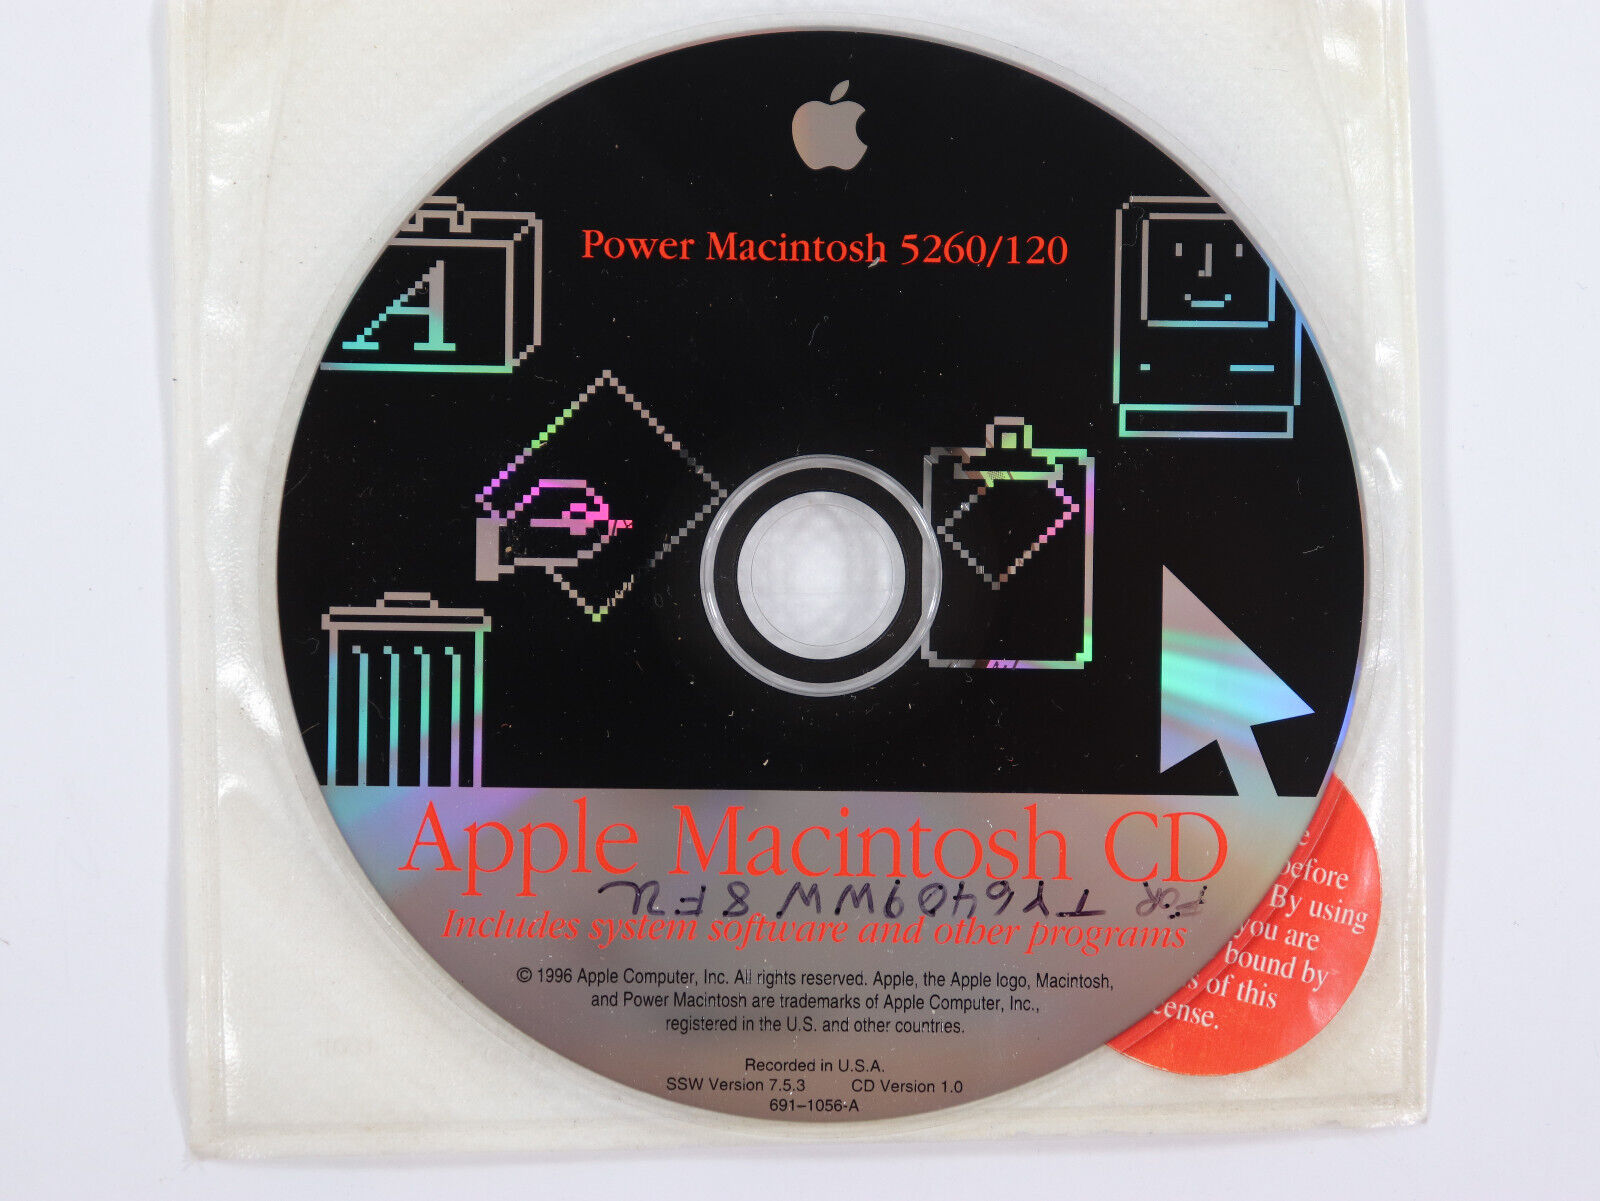 Apple Power Macintosh 5260/120 OEM CD v7.5.3 - 691-1056-A - Fast Shipping in US